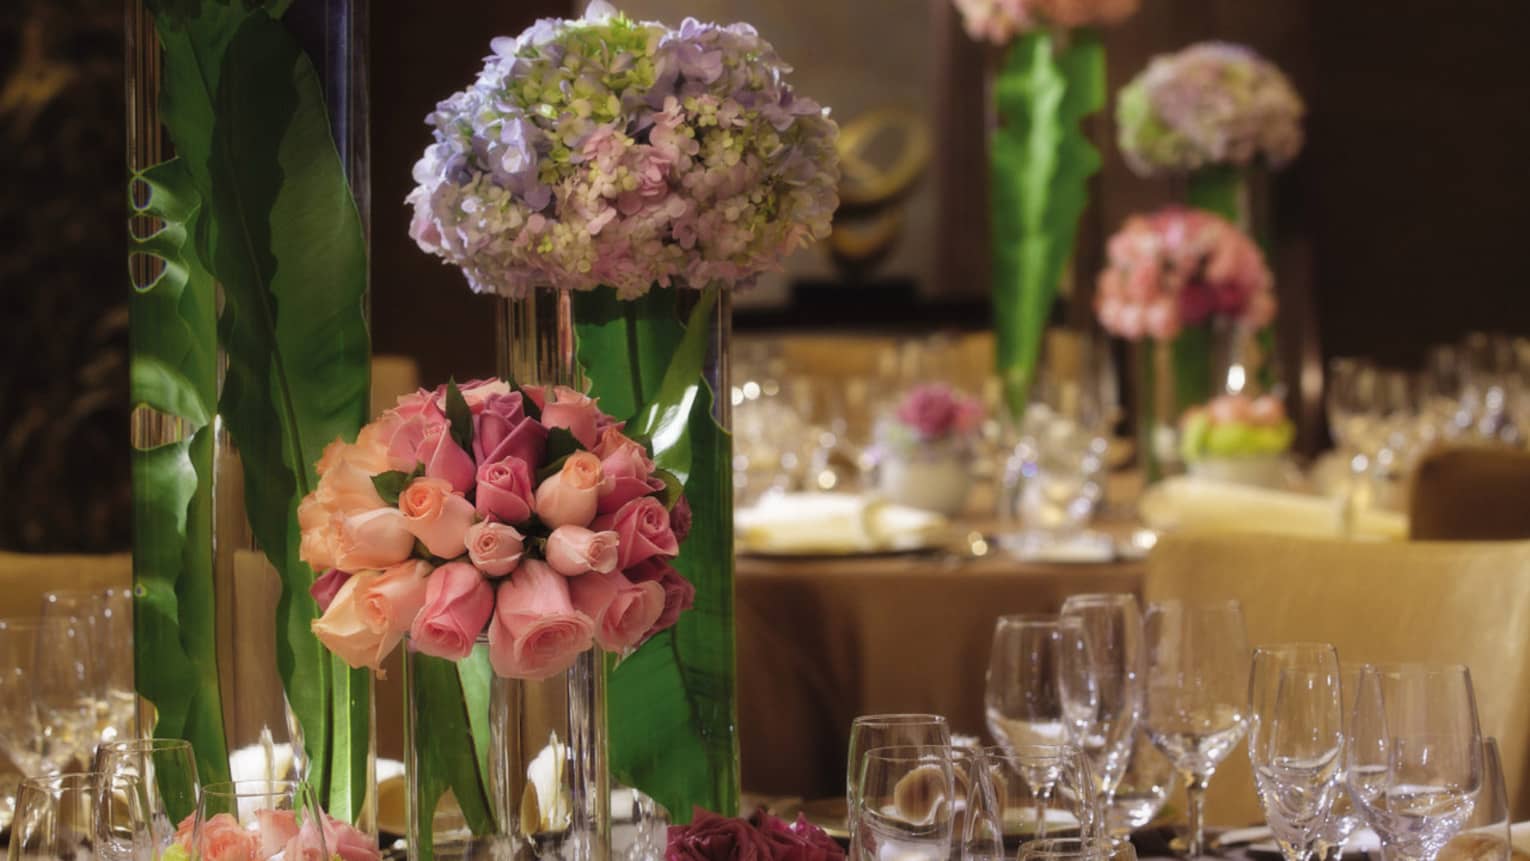 Pink roses in glass vase on formal dining banquet table